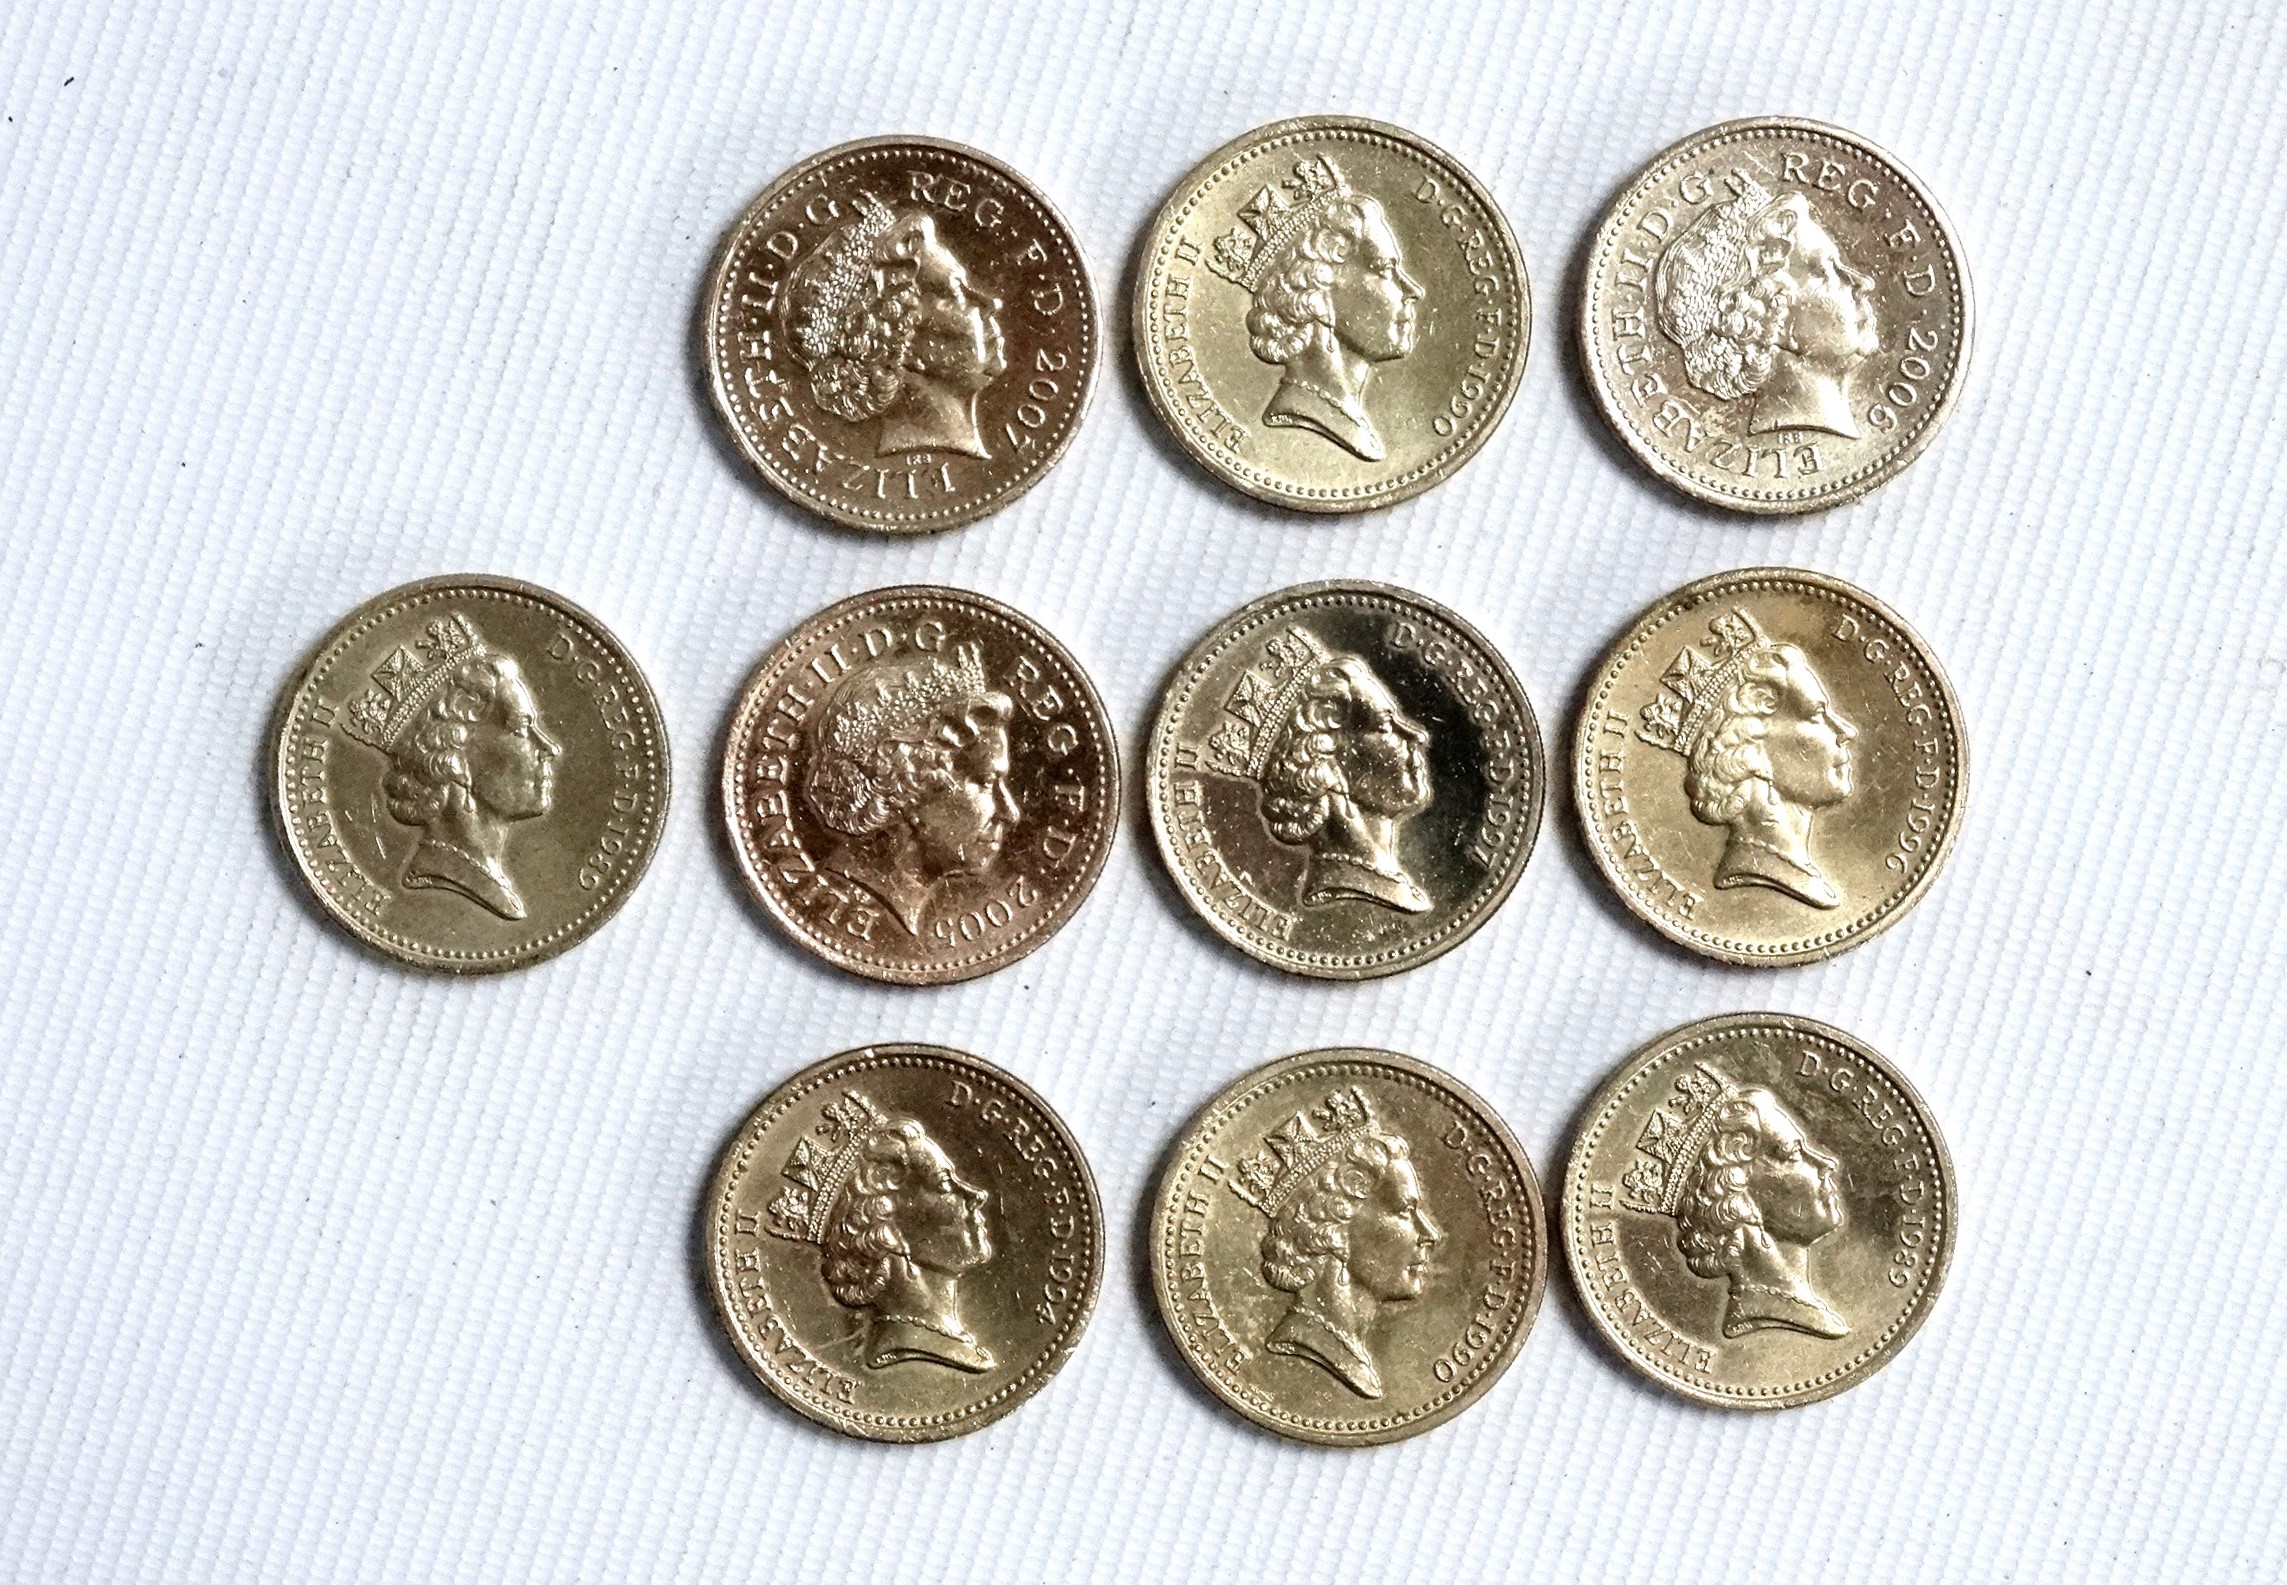 Ten £1 coins - various reverses, 1989, 1990, 1994, 1996, 1997, 2005, 2006 and 2007.